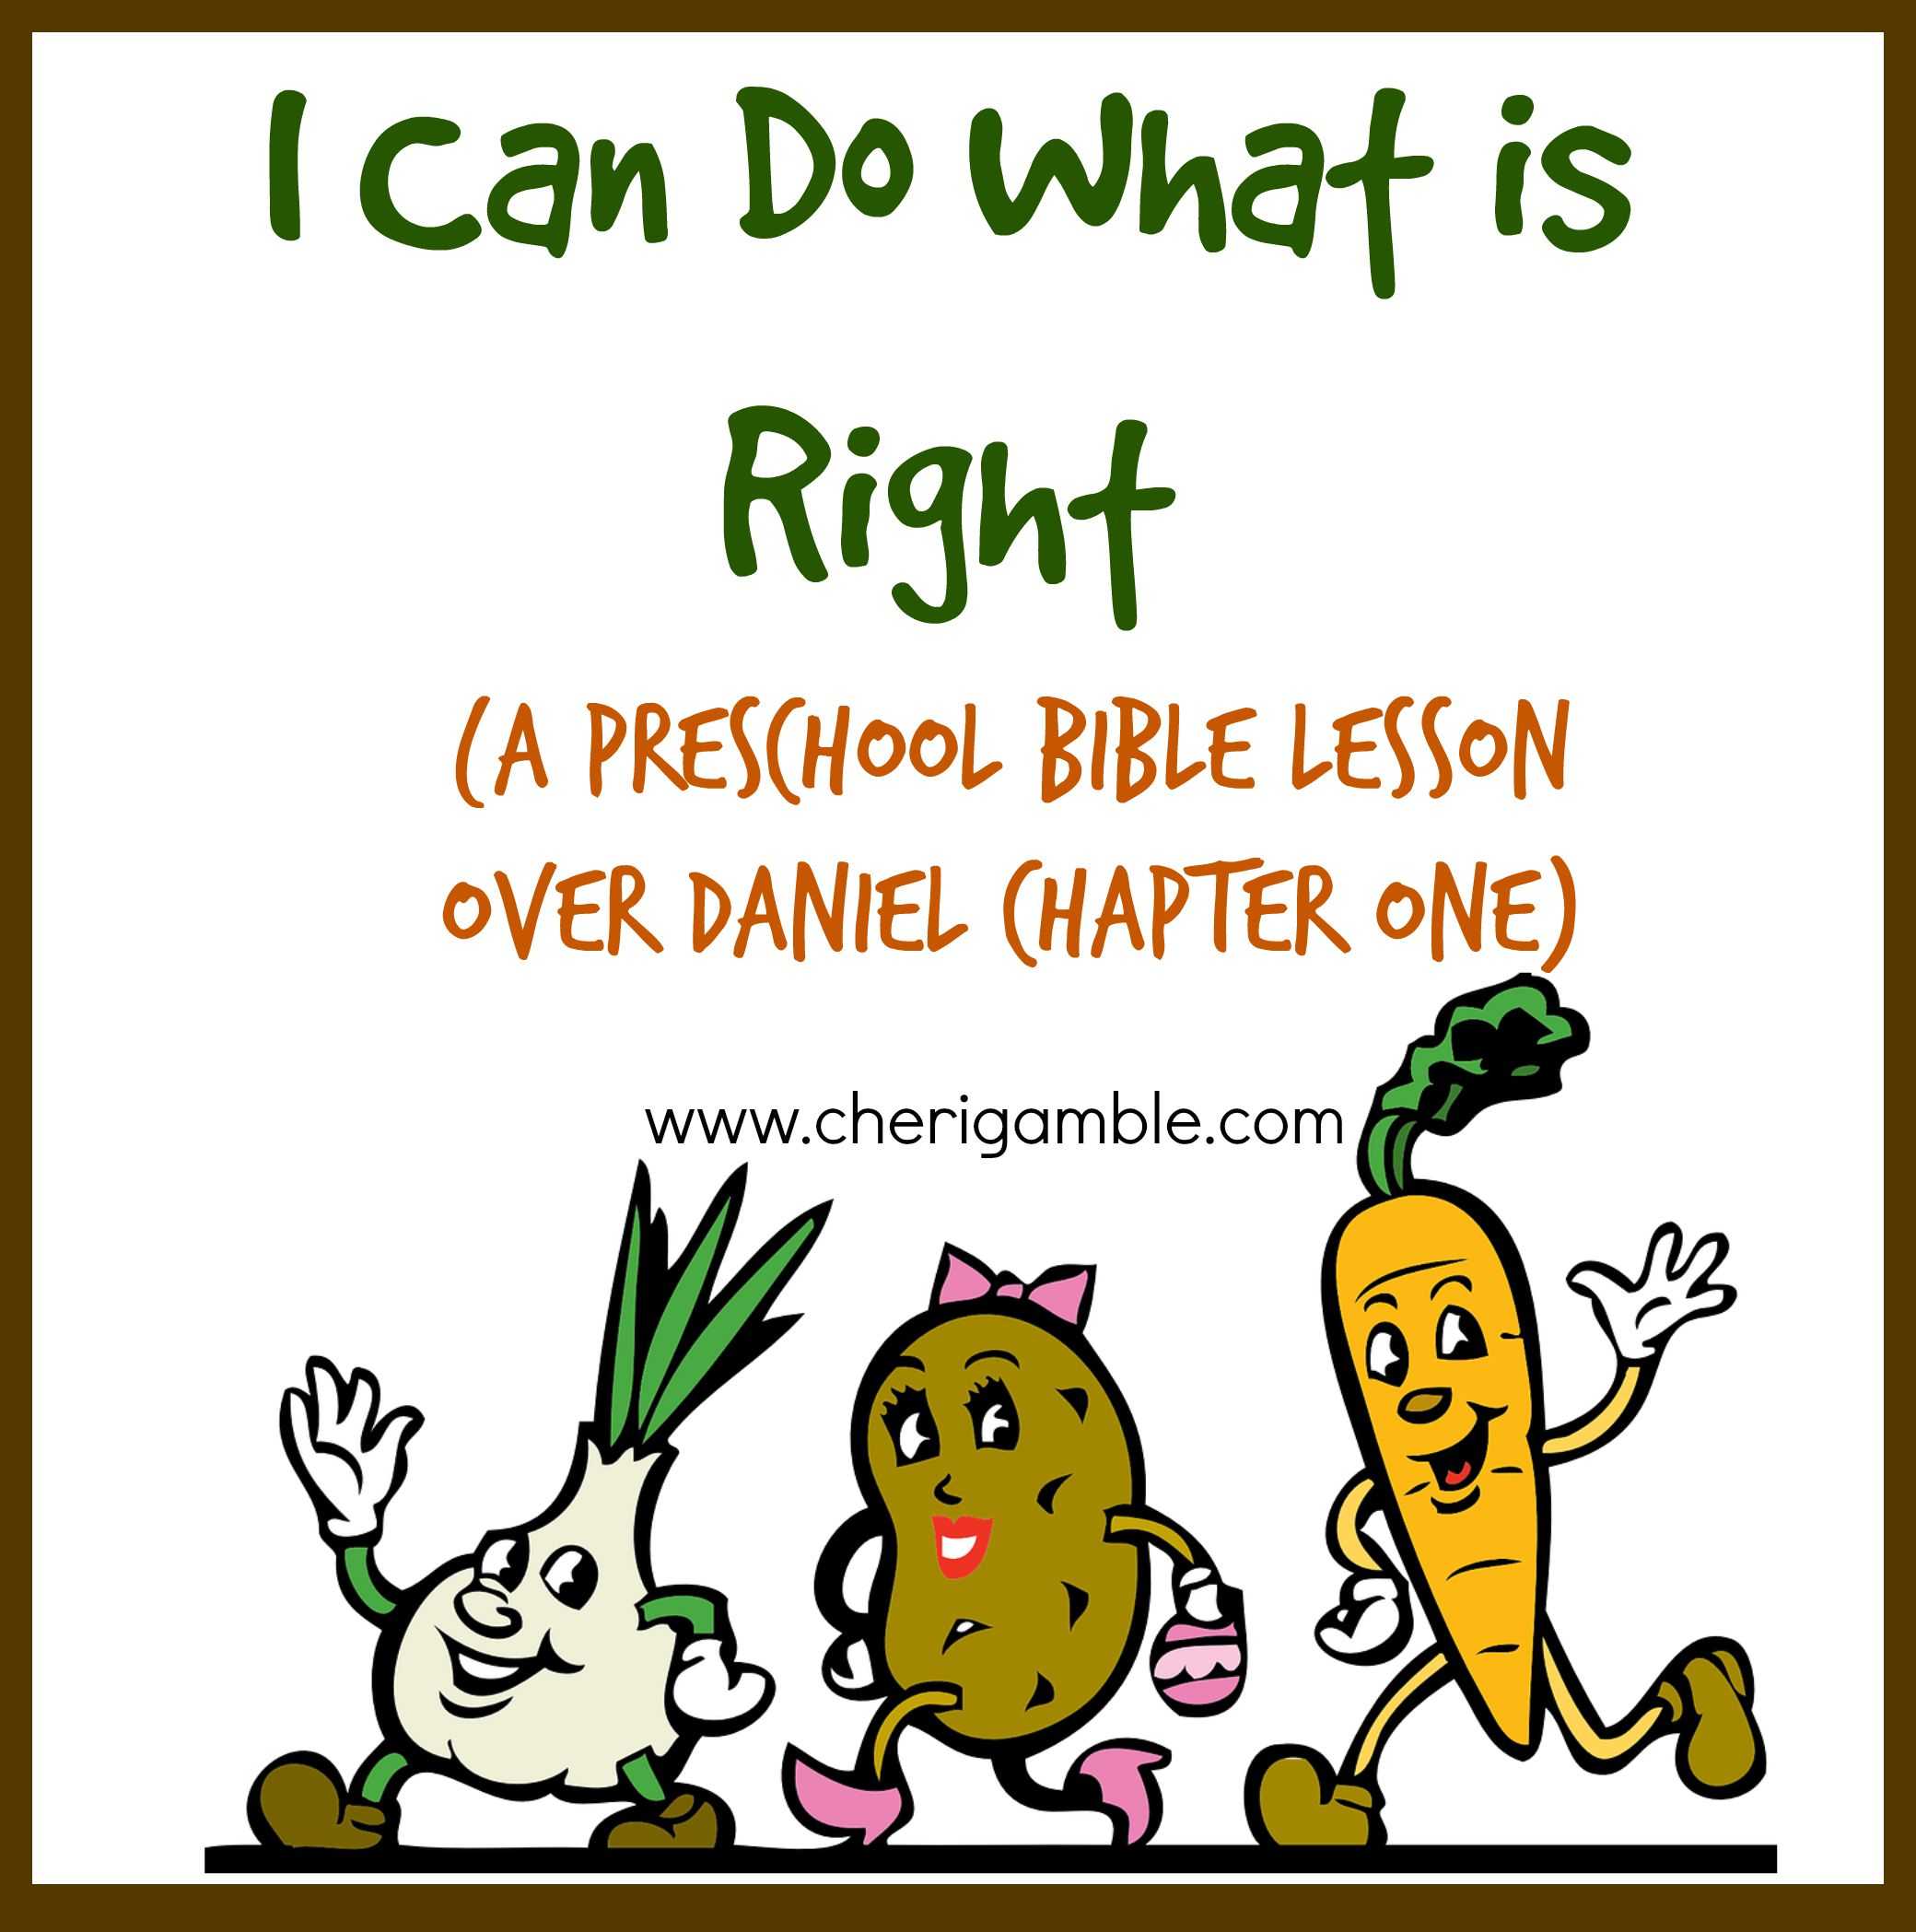 Fairy Tale Worksheets together with I Can Do What is Right A Preschool Bible Lesson Over Daniel 1